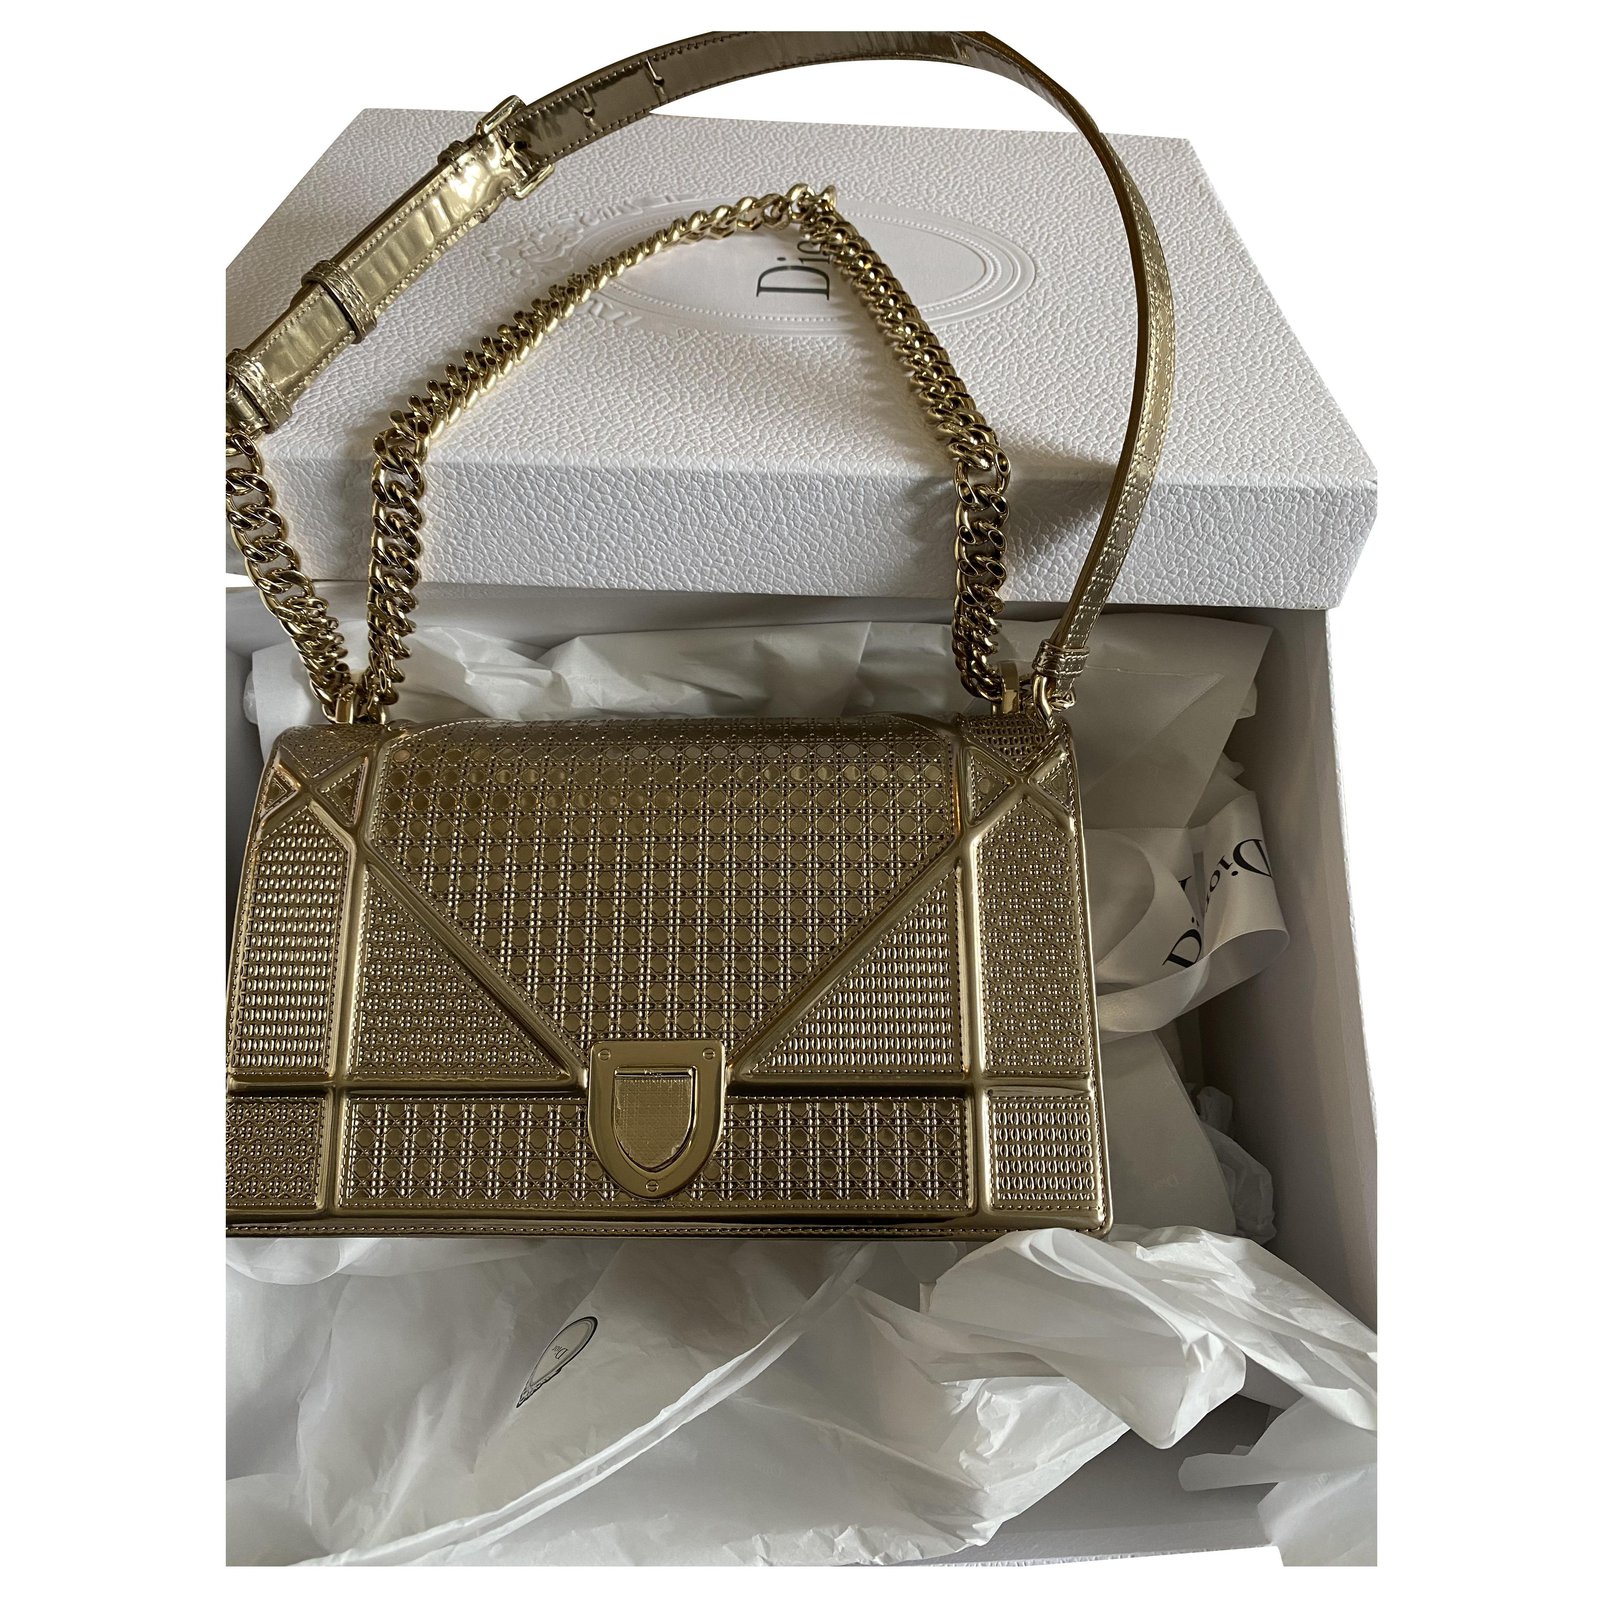 The Christian Dior Diorama Bag Has Arrived in Stores  PurseBlog